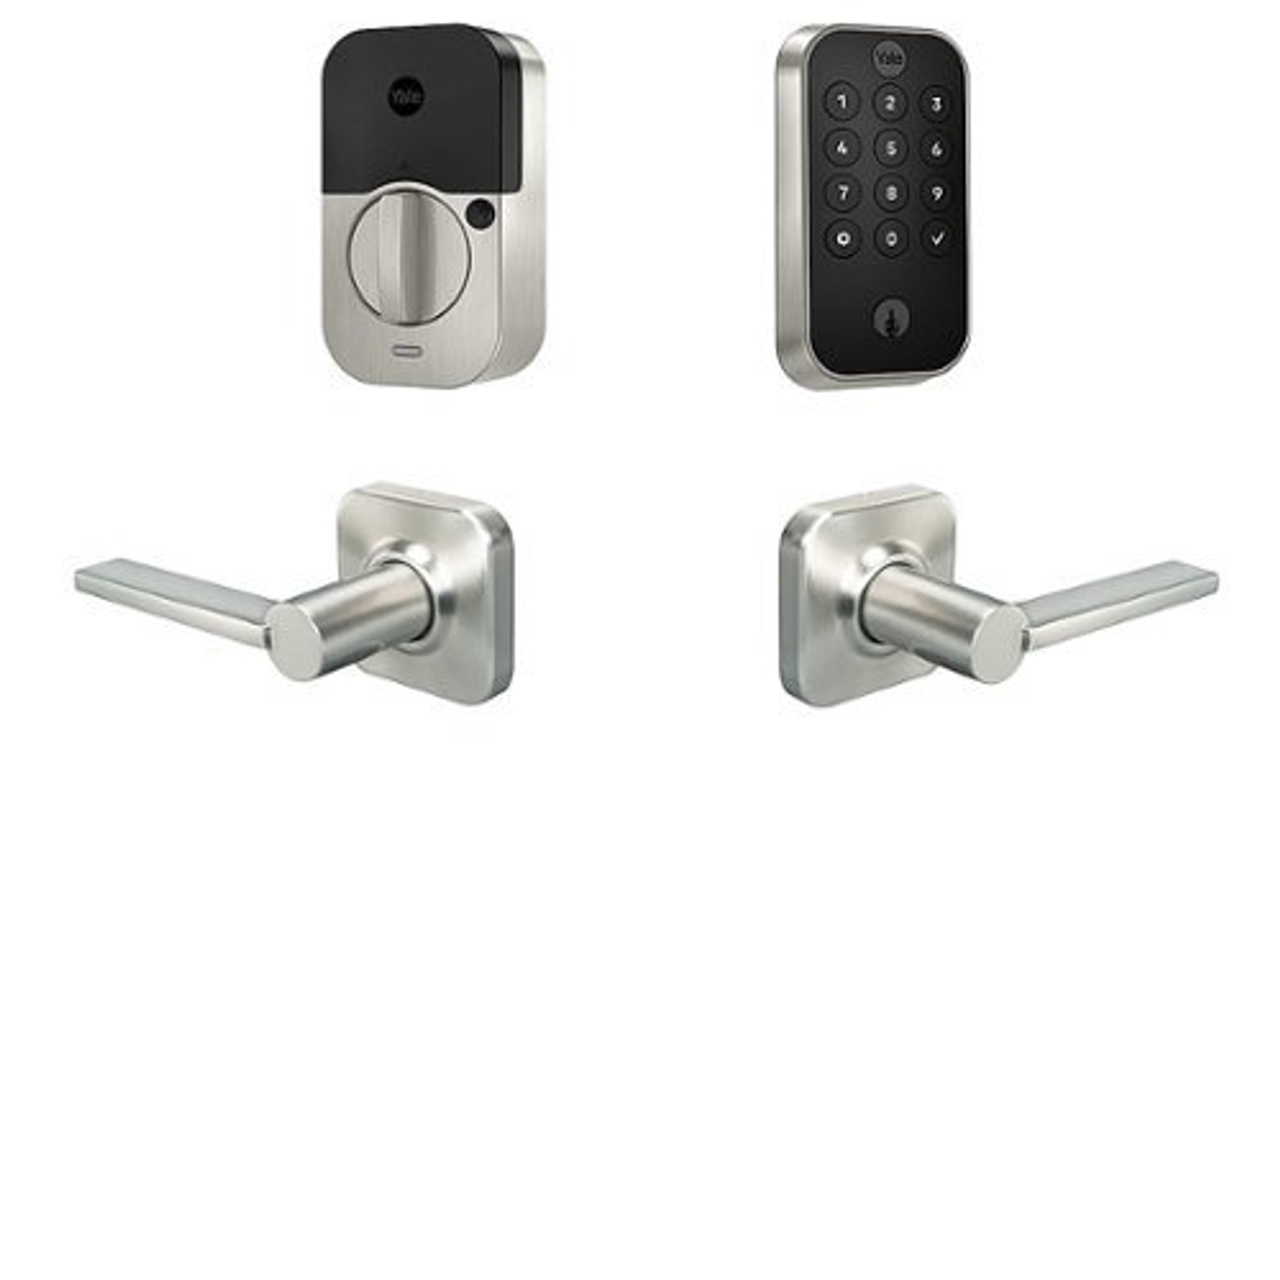 Yale - Assure 2 Valdosta Lever Smart Lock Wi-Fi Replacement Deadbolt with Keypad and App Access - Satin Nickel